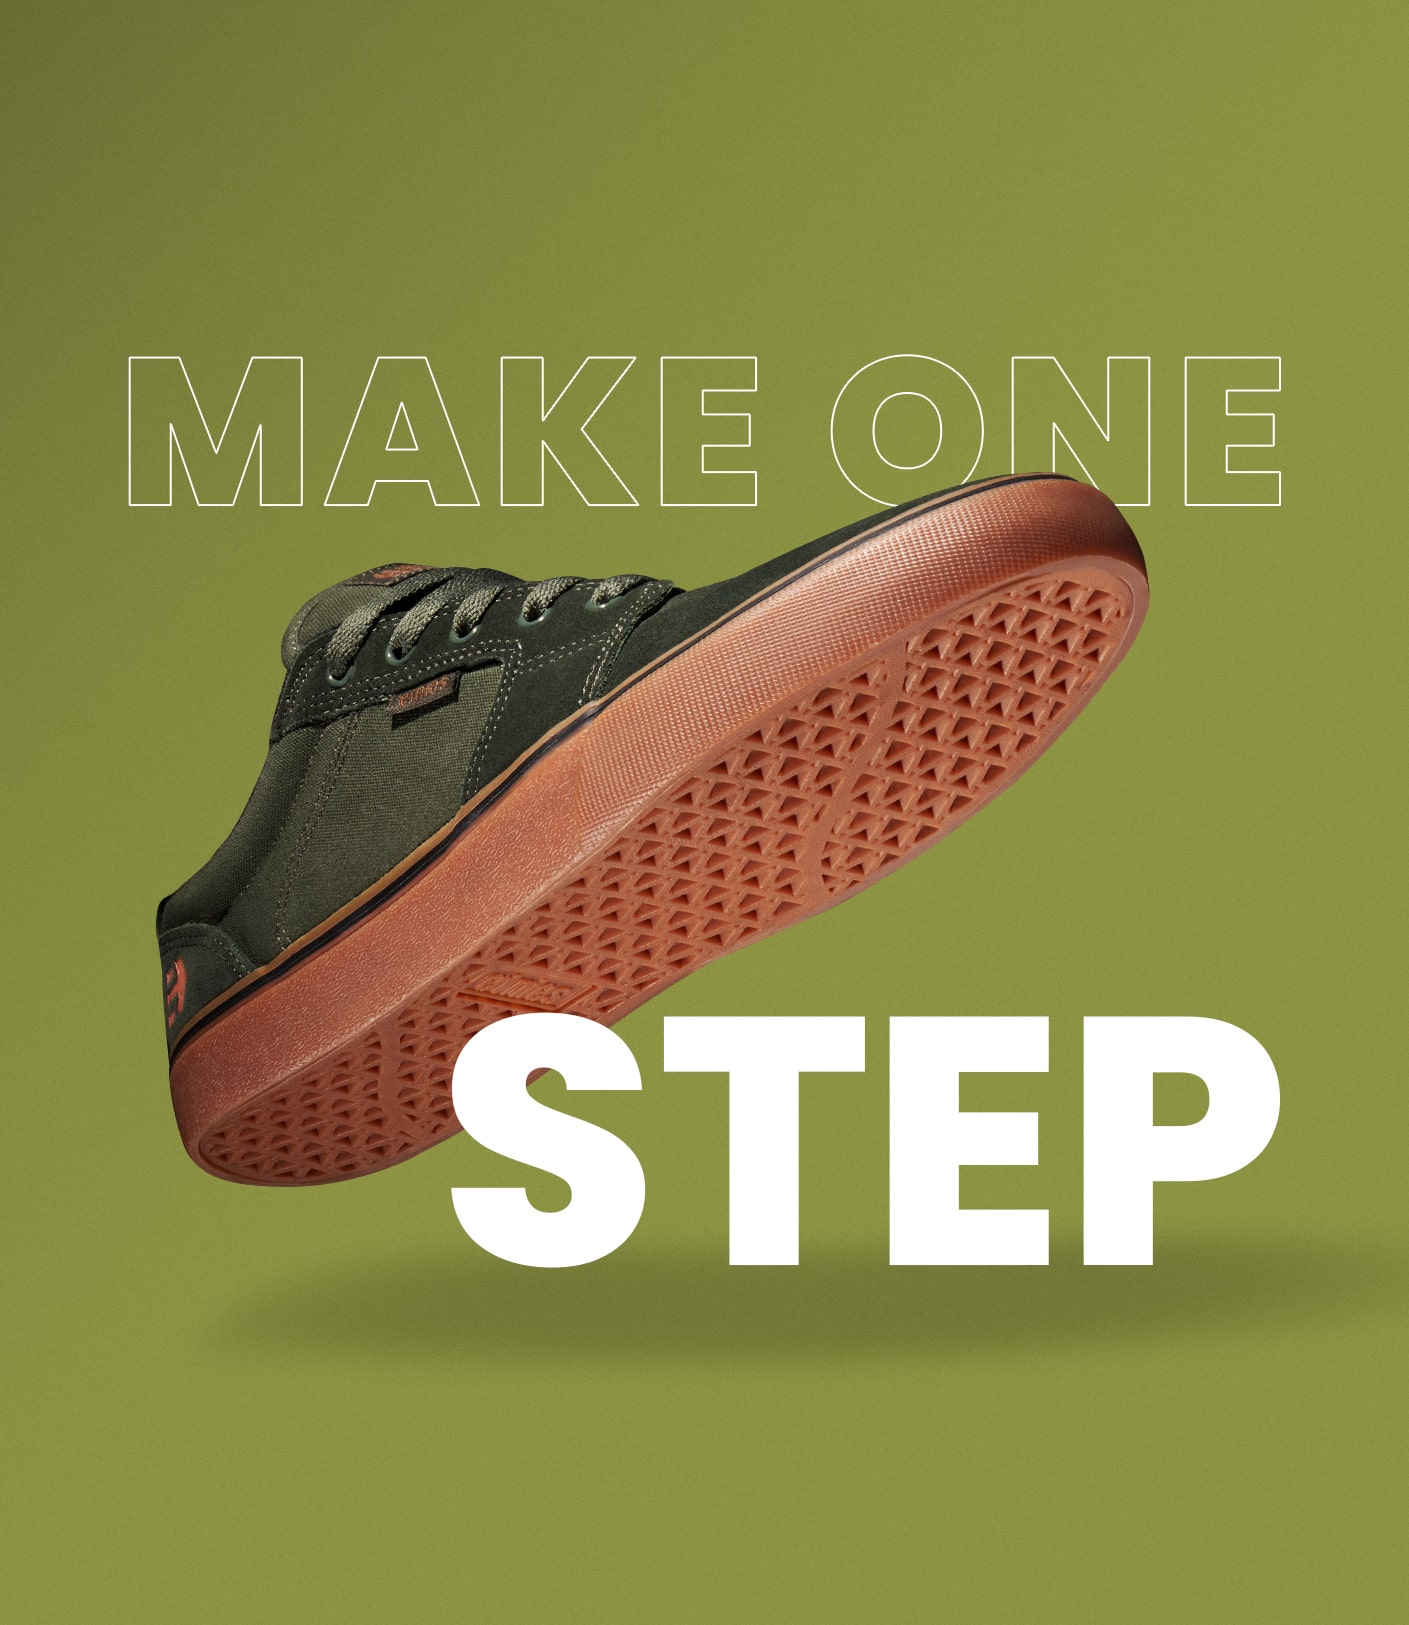 A mix of graphic design with photography with the message " Make one Step" Depicting a sneaker shoe in air, lightly touching letter S from Step.